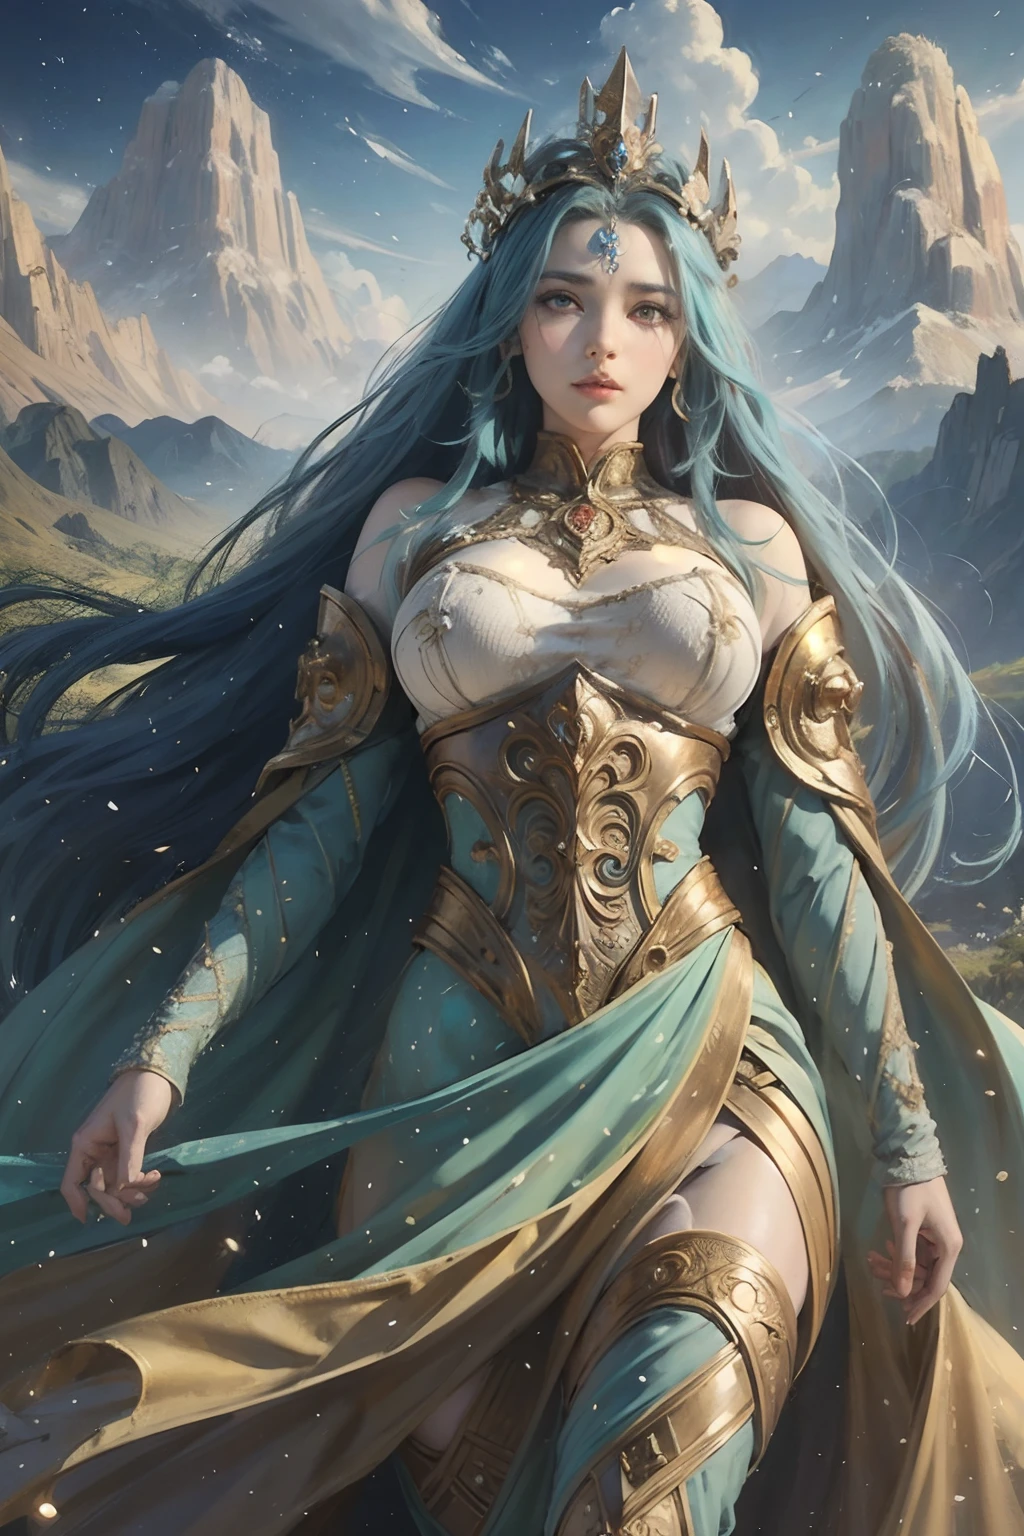 "(Masterpiece, Top Quality: 1.2), Official Art, Earth Goddess, Towering Over Mountains and Rivers, Holding the Planet Earth, Eyes (Deep Earthly Gaze: 1.3), Crown Adorned with Elements of Nature, (Gown of Majestic Landscapes: 1.4), (Immense Stature Amidst Earth's Beauty: 1.1), (Natural Background: 1.5), (Aura of Earthly Grandeur), Nature as Her Domain."